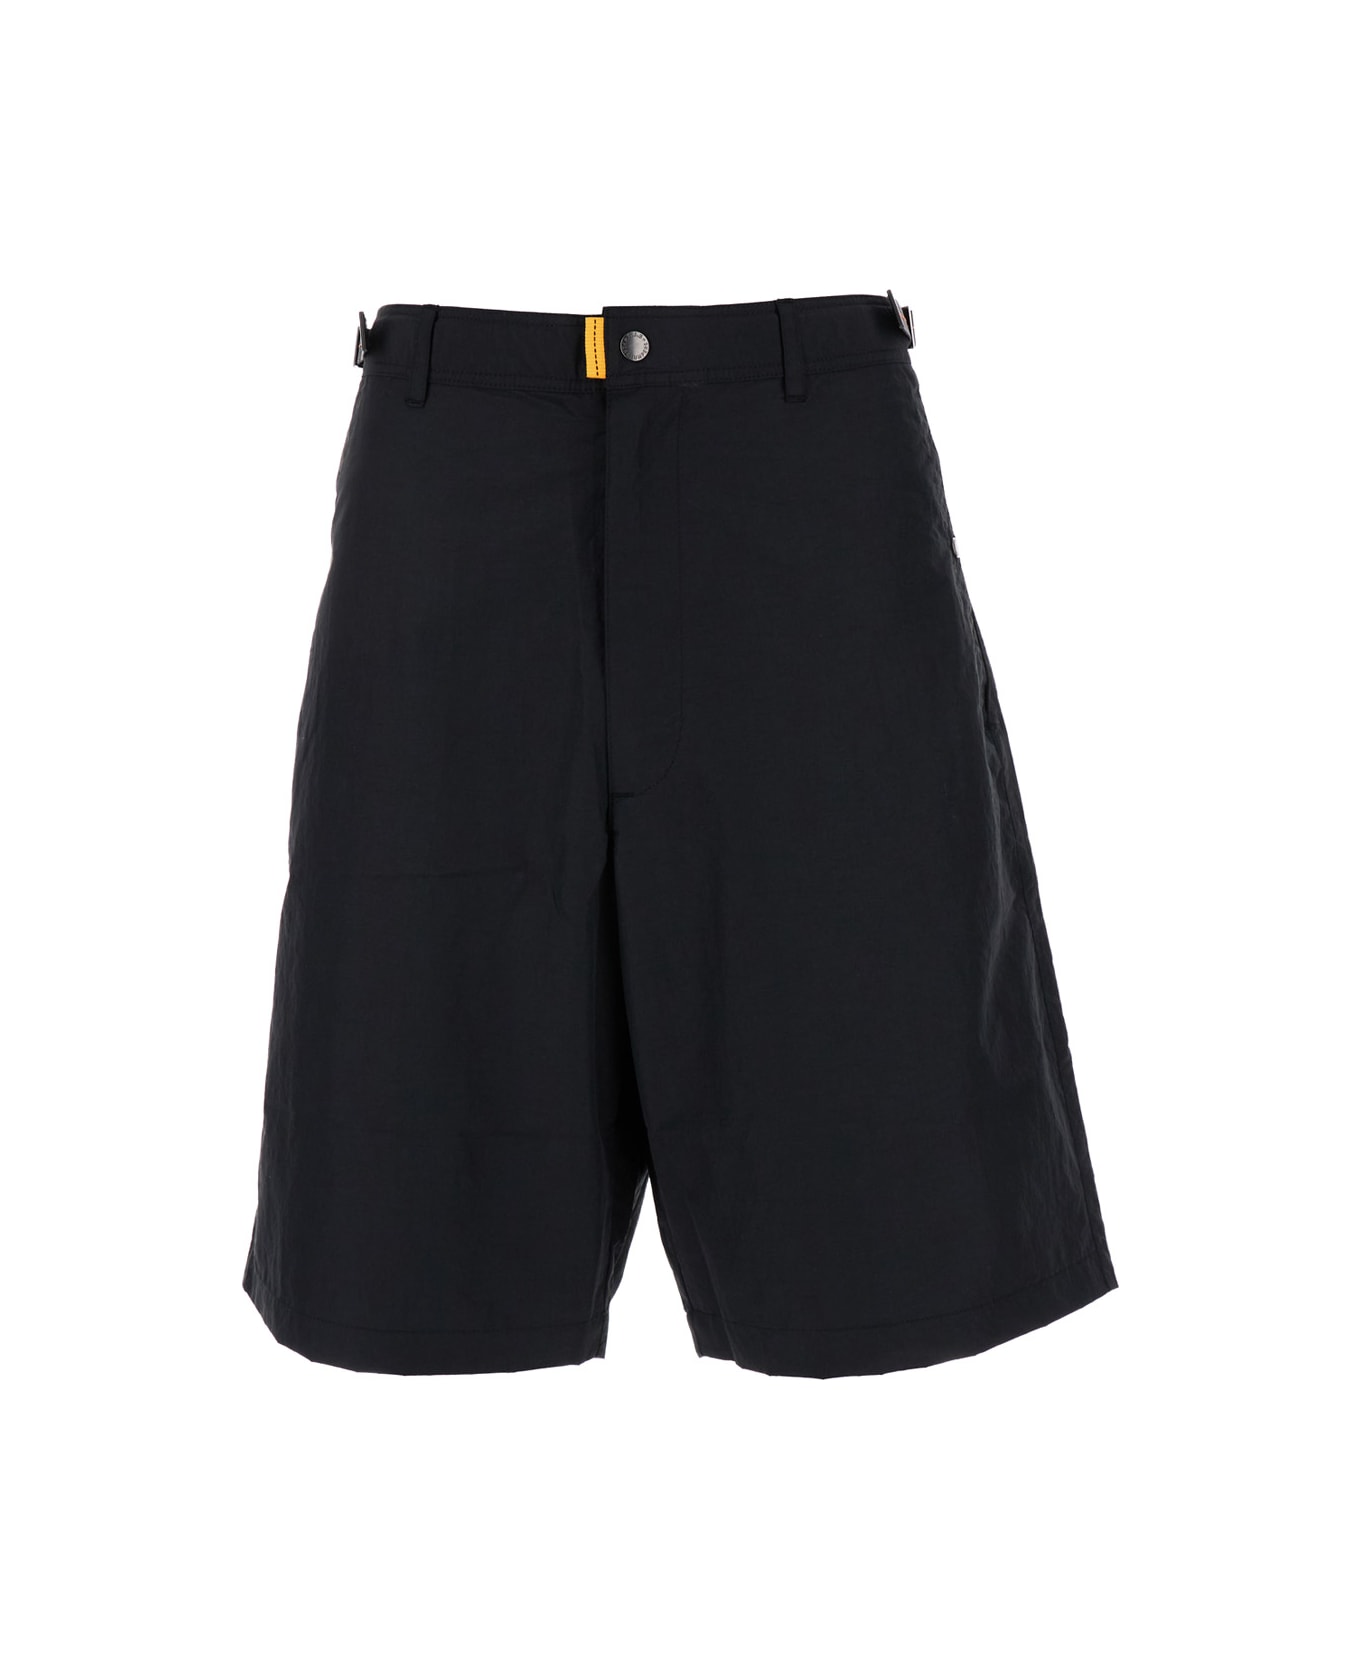 Parajumpers Black Bermuda Shorts With Buckles At Sides In Cotton Blend Man - Black ショートパンツ